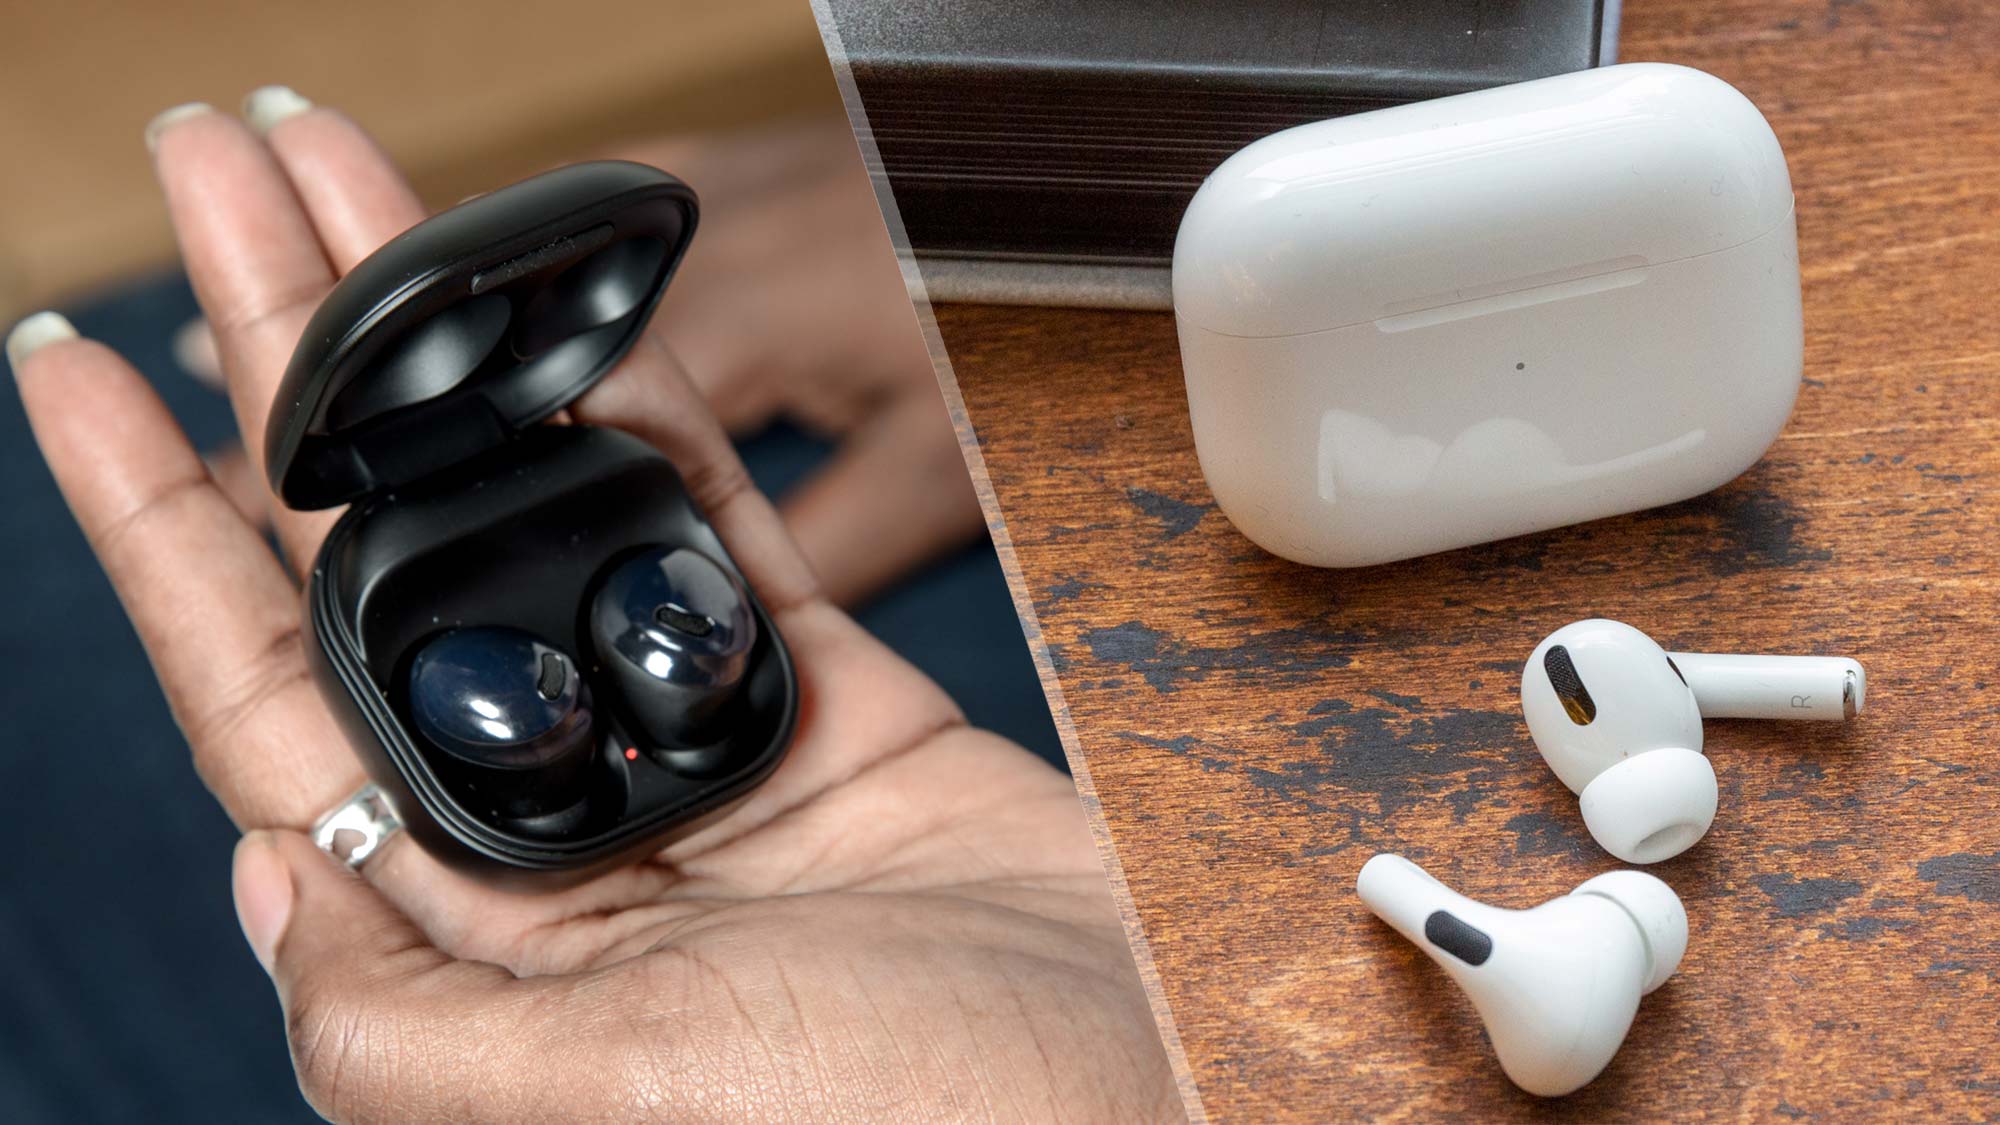 gasoline To contaminate pageant Samsung Galaxy Buds Pro vs AirPods Pro | Laptop Mag